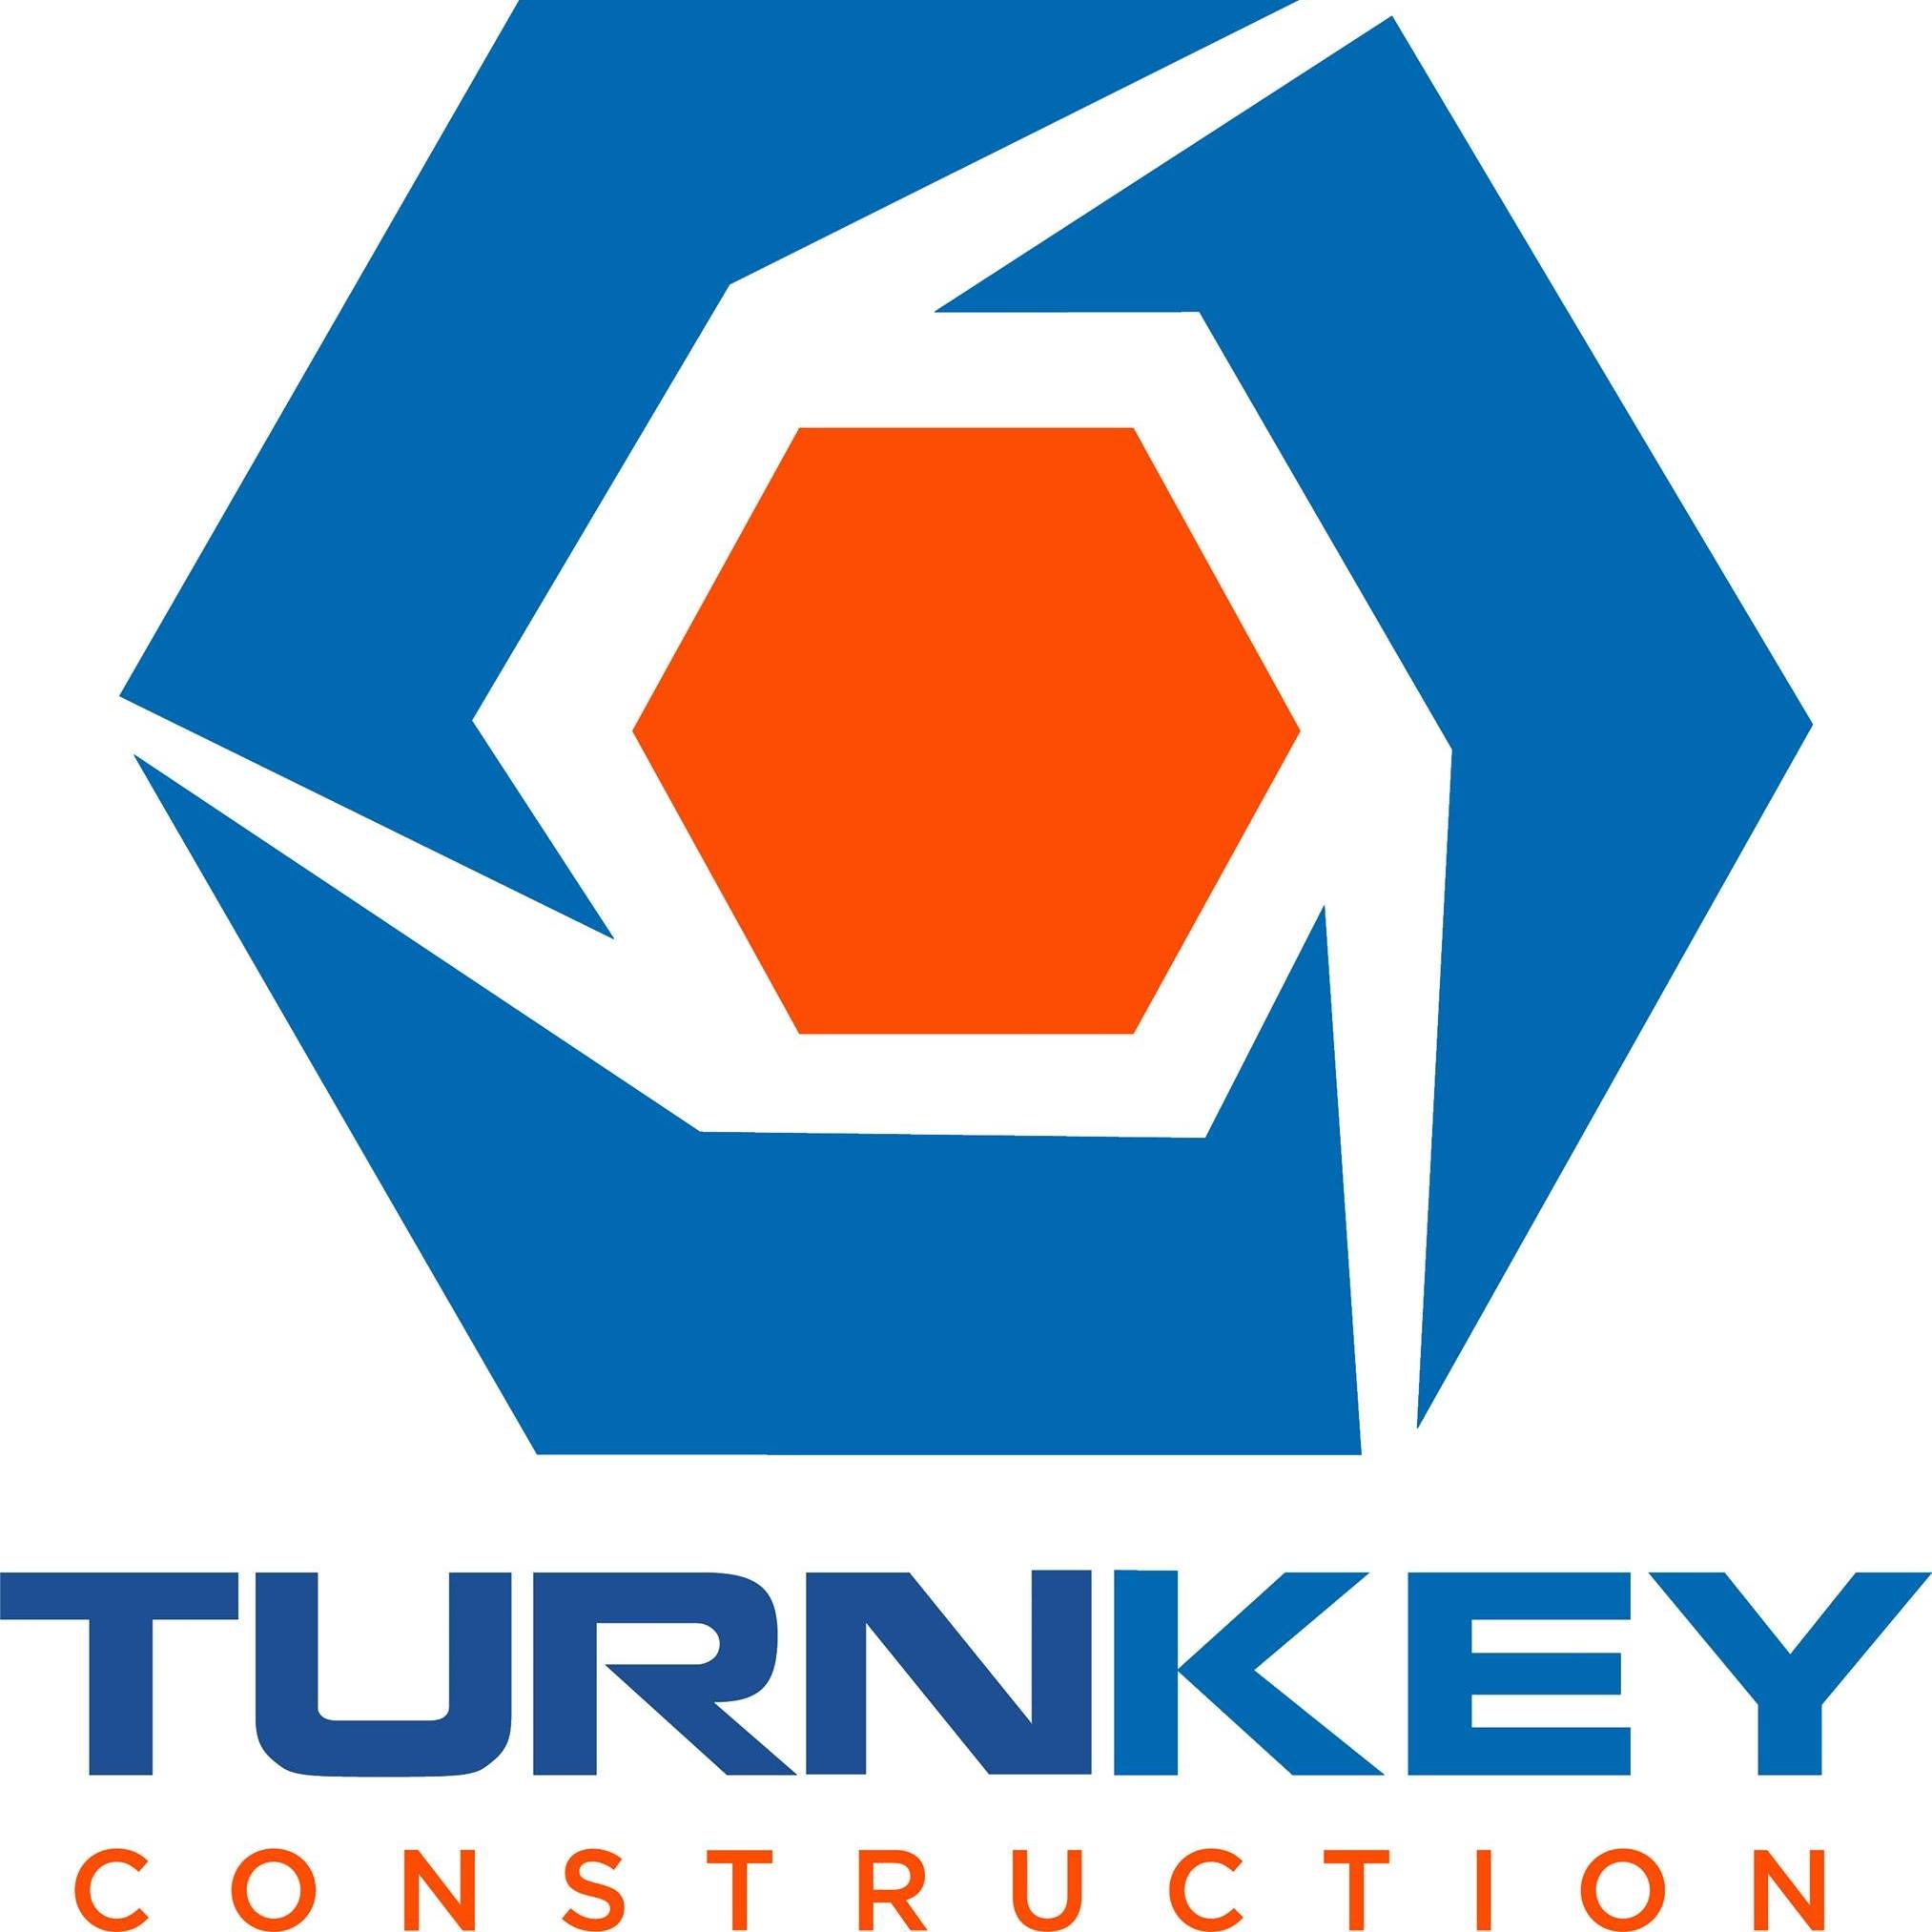 Business logo of Turnkey Construction Co